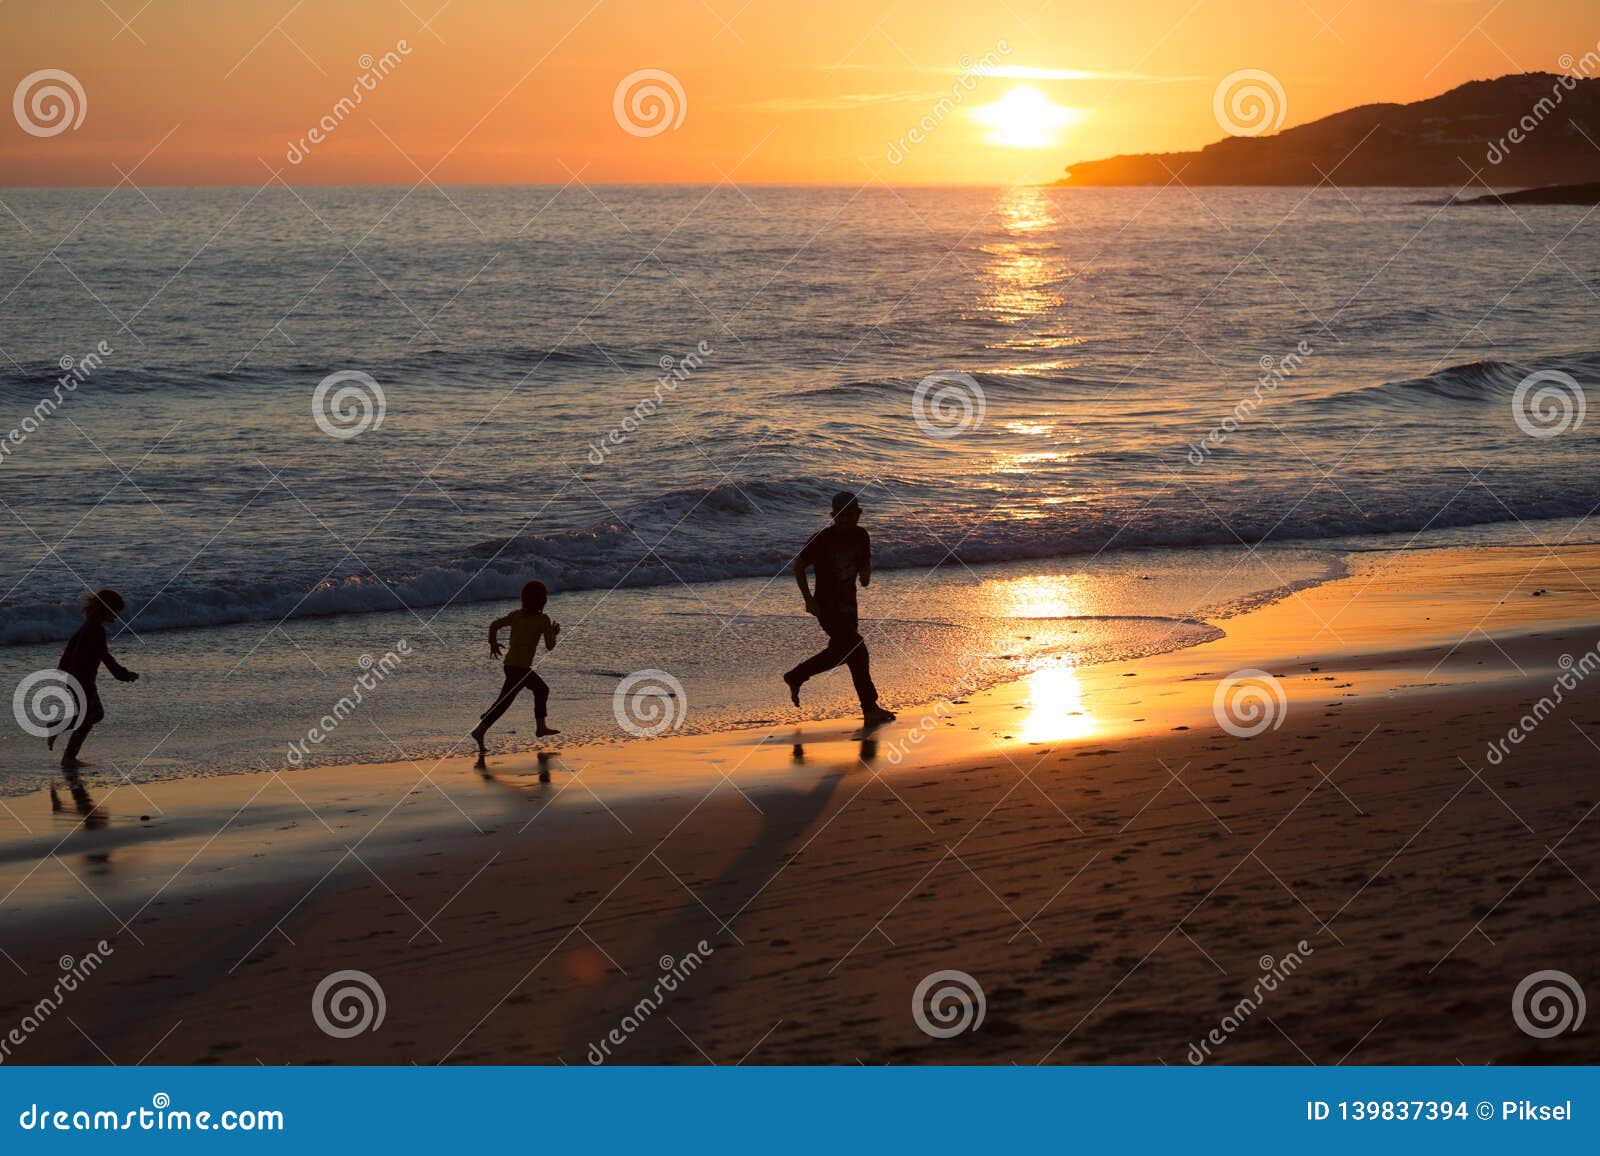 father and children running on the beach during sunset, praia da luz, portugal